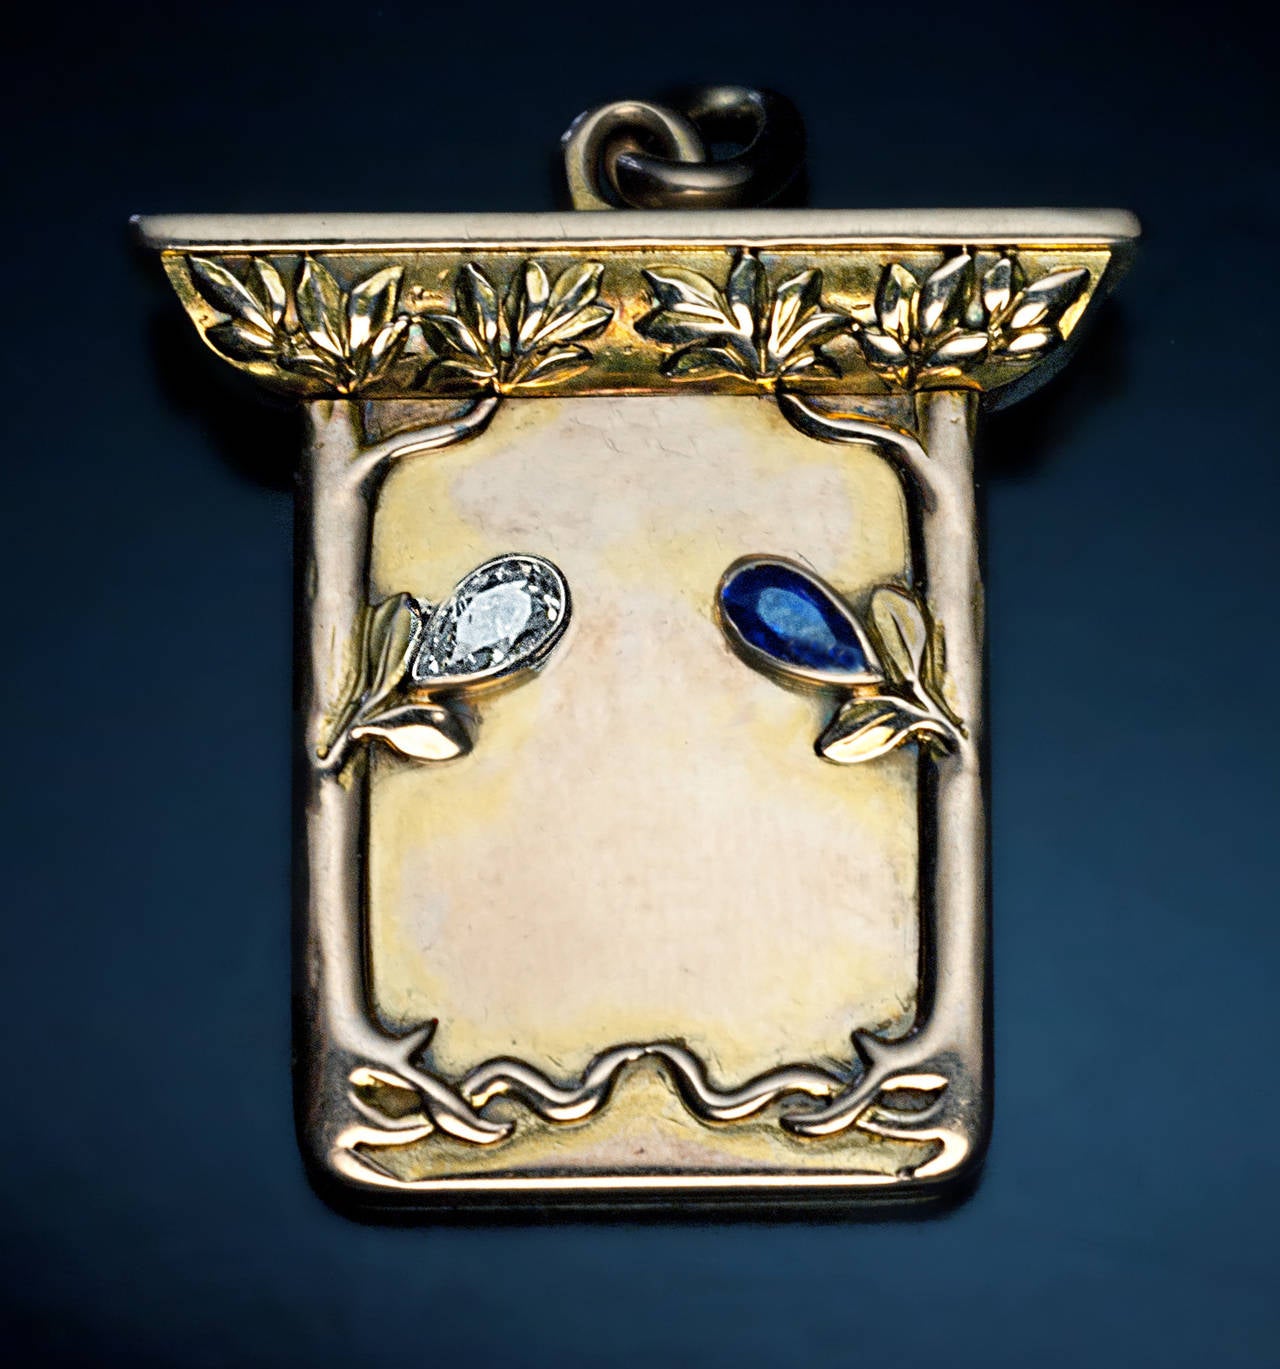 Made in Moscow between 1899 and 1908 by W.A.Bolin, jeweler of the Russian Imperial Court

The front of the locket is decorated with two stylized trees in Art Nouveau taste, embellished with a pear shaped diamond and a blue sapphire. The interior